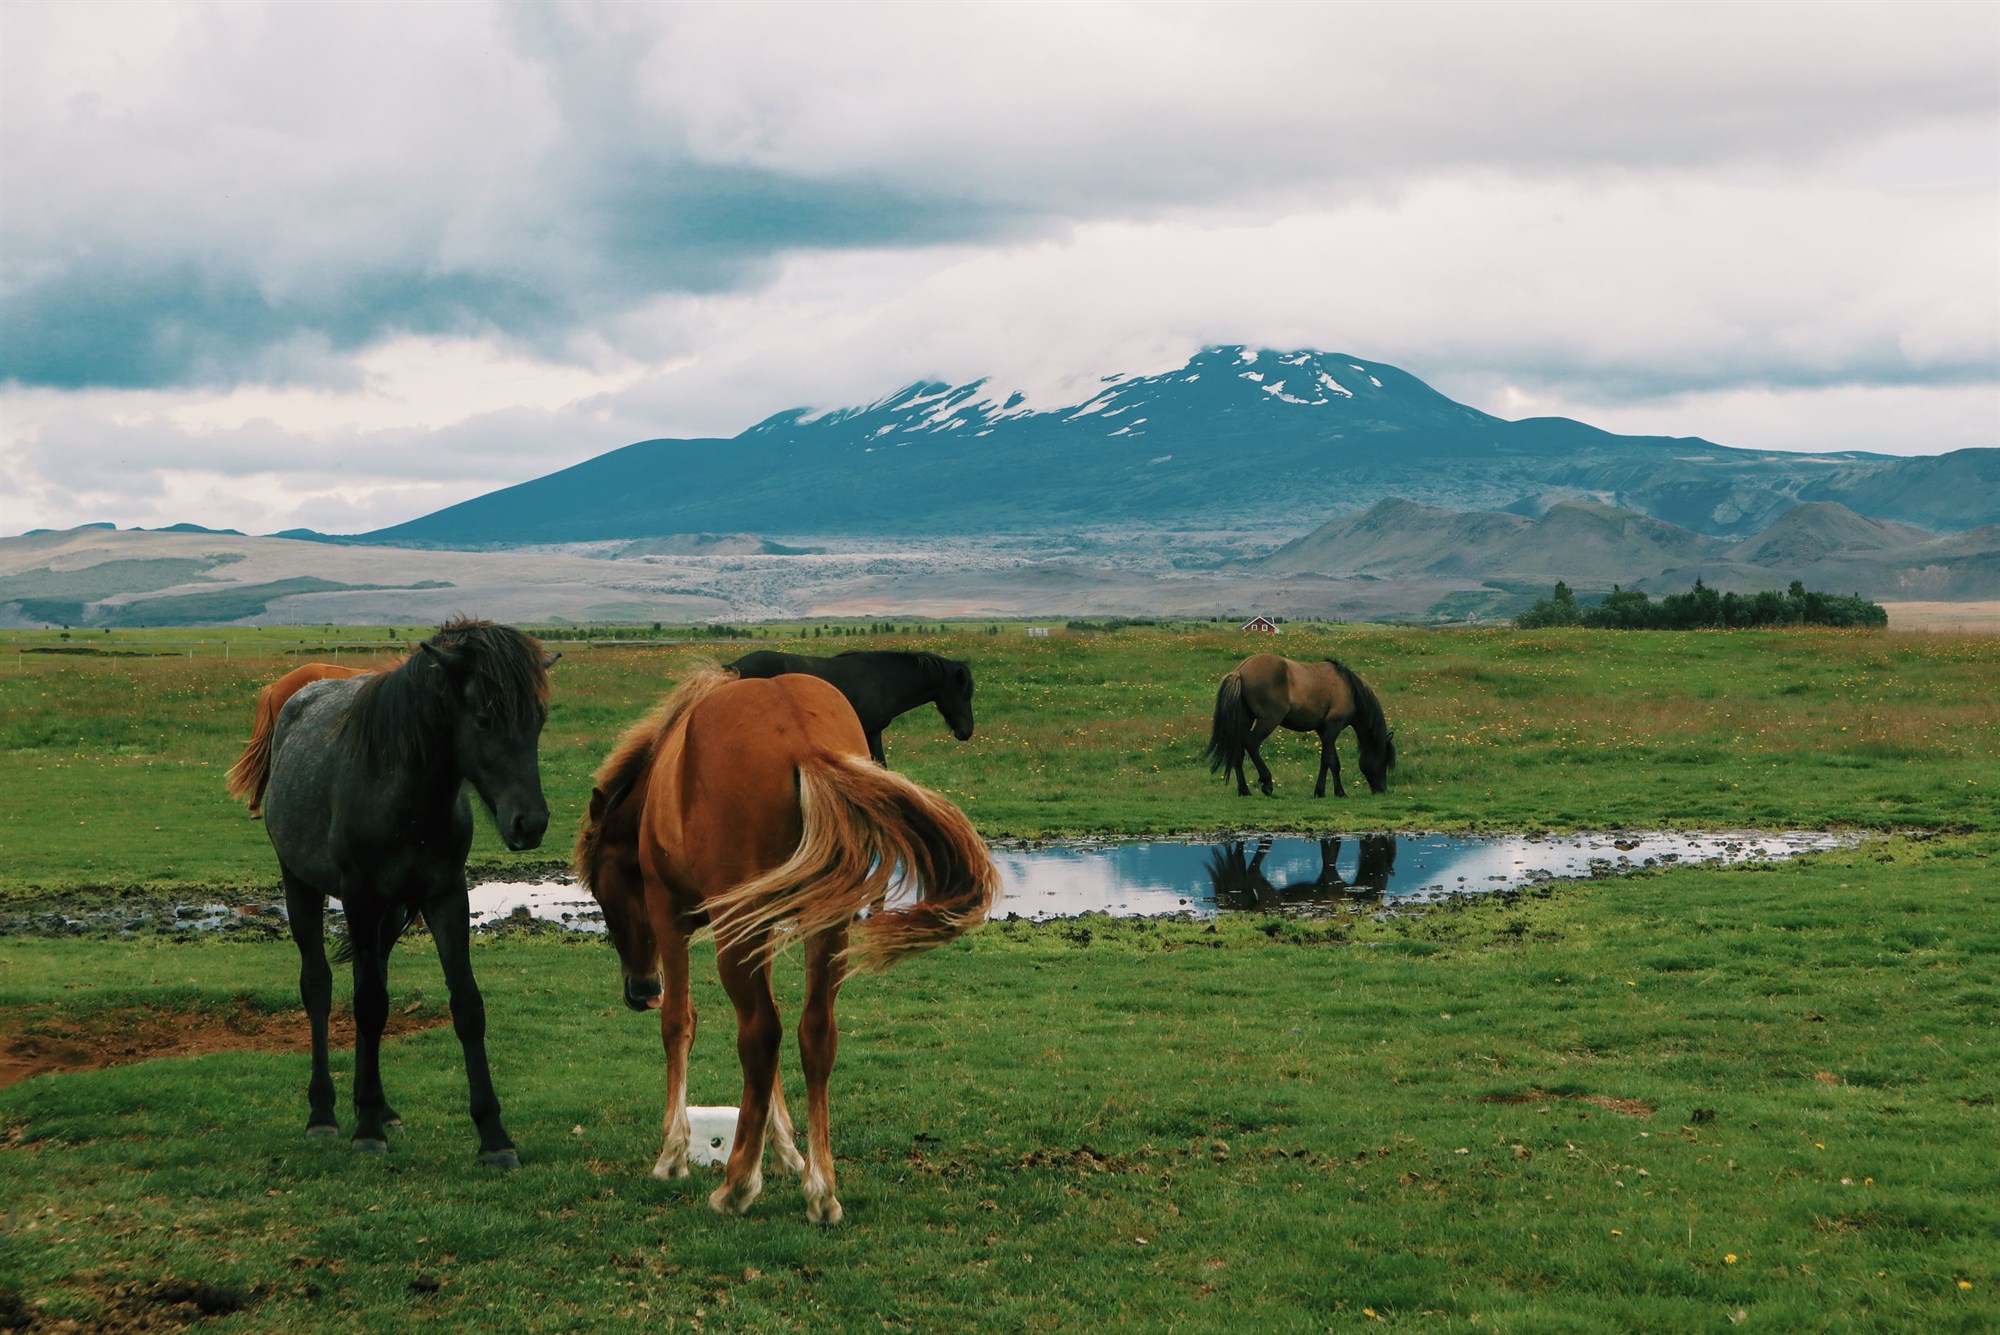 Horses grazing with Hekla volcano behind them in the distance